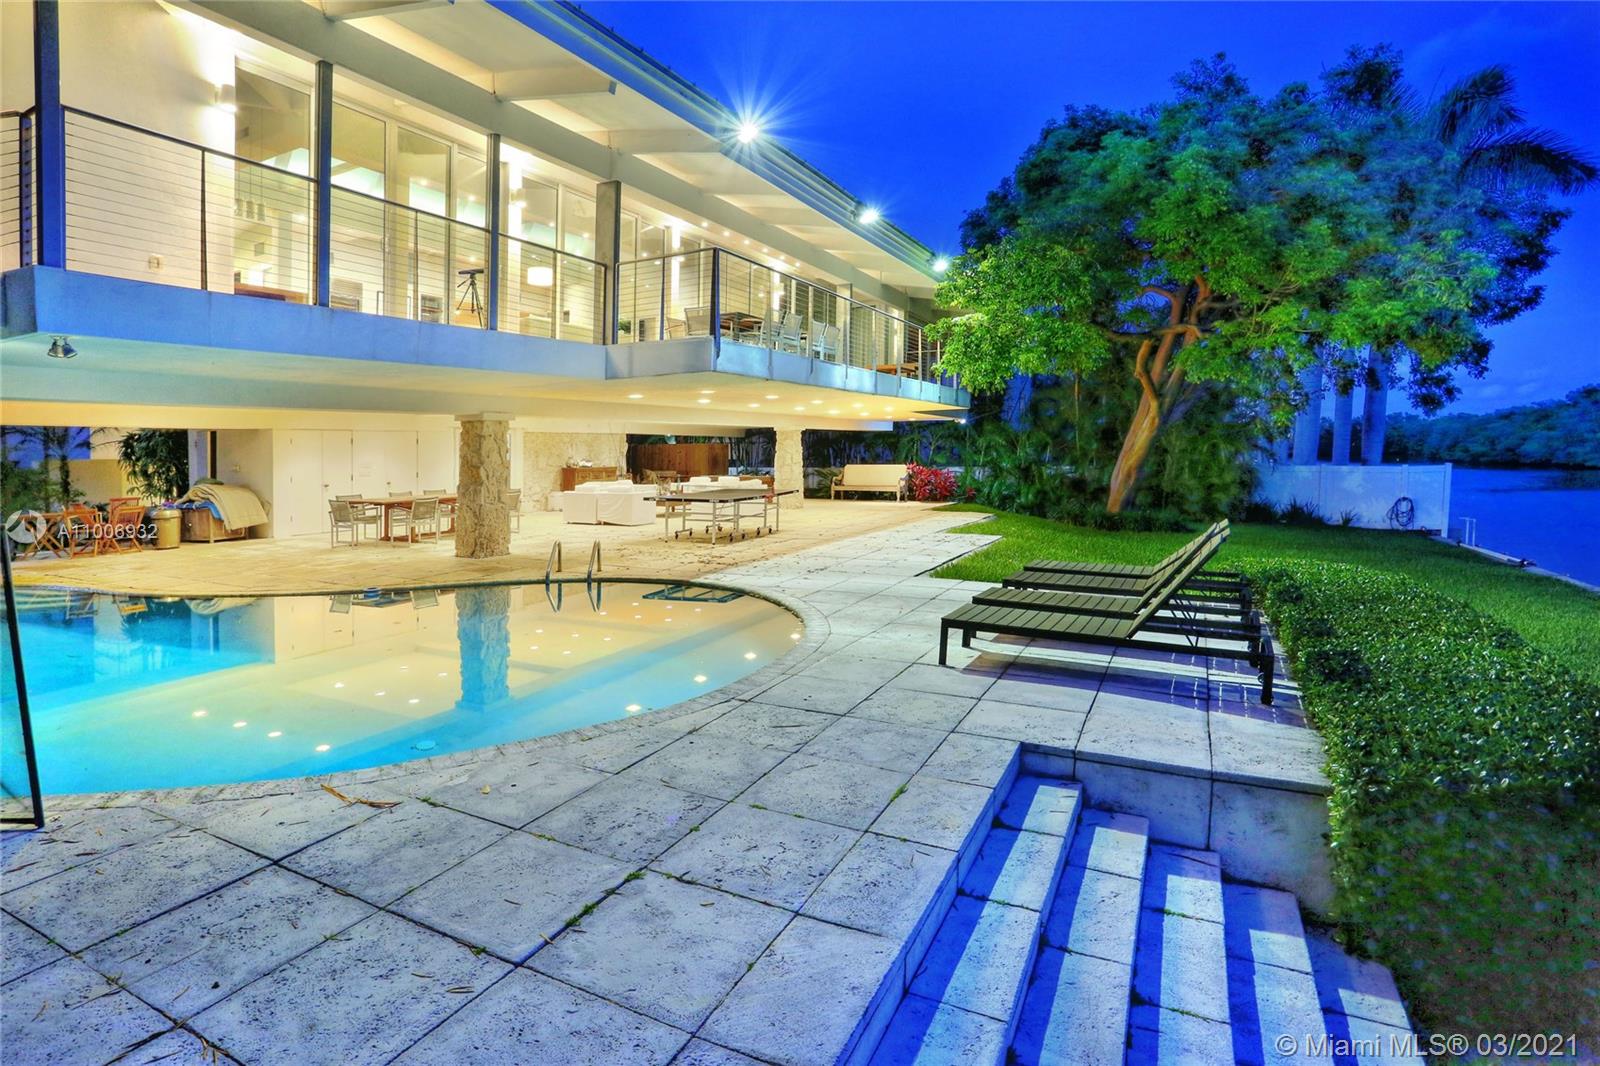 Extraordinary waterfront location. Unique contemporary architecture facing Pines Canal and State Park Bill Baggs. Direct access to Biscayne Bay. The location of this residence is a jewel. Total privacy on a double cul-de-sac street. Gated. Yacht accommodation, large covered pool area to enjoy the water view, cabana bath w/ large inviting couches. The house is elevated w/large Master Suite, reception area, office & open kitchen w/direct water and State Park view. 3 additional bedrooms on the other side of the house. Wood floors t/o the house. High ceilings. Top of the line kitchen, concrete countertop. Reception area offers loft feeling that blends with the exterior. Large balcony. Beautiful landscape and trees.